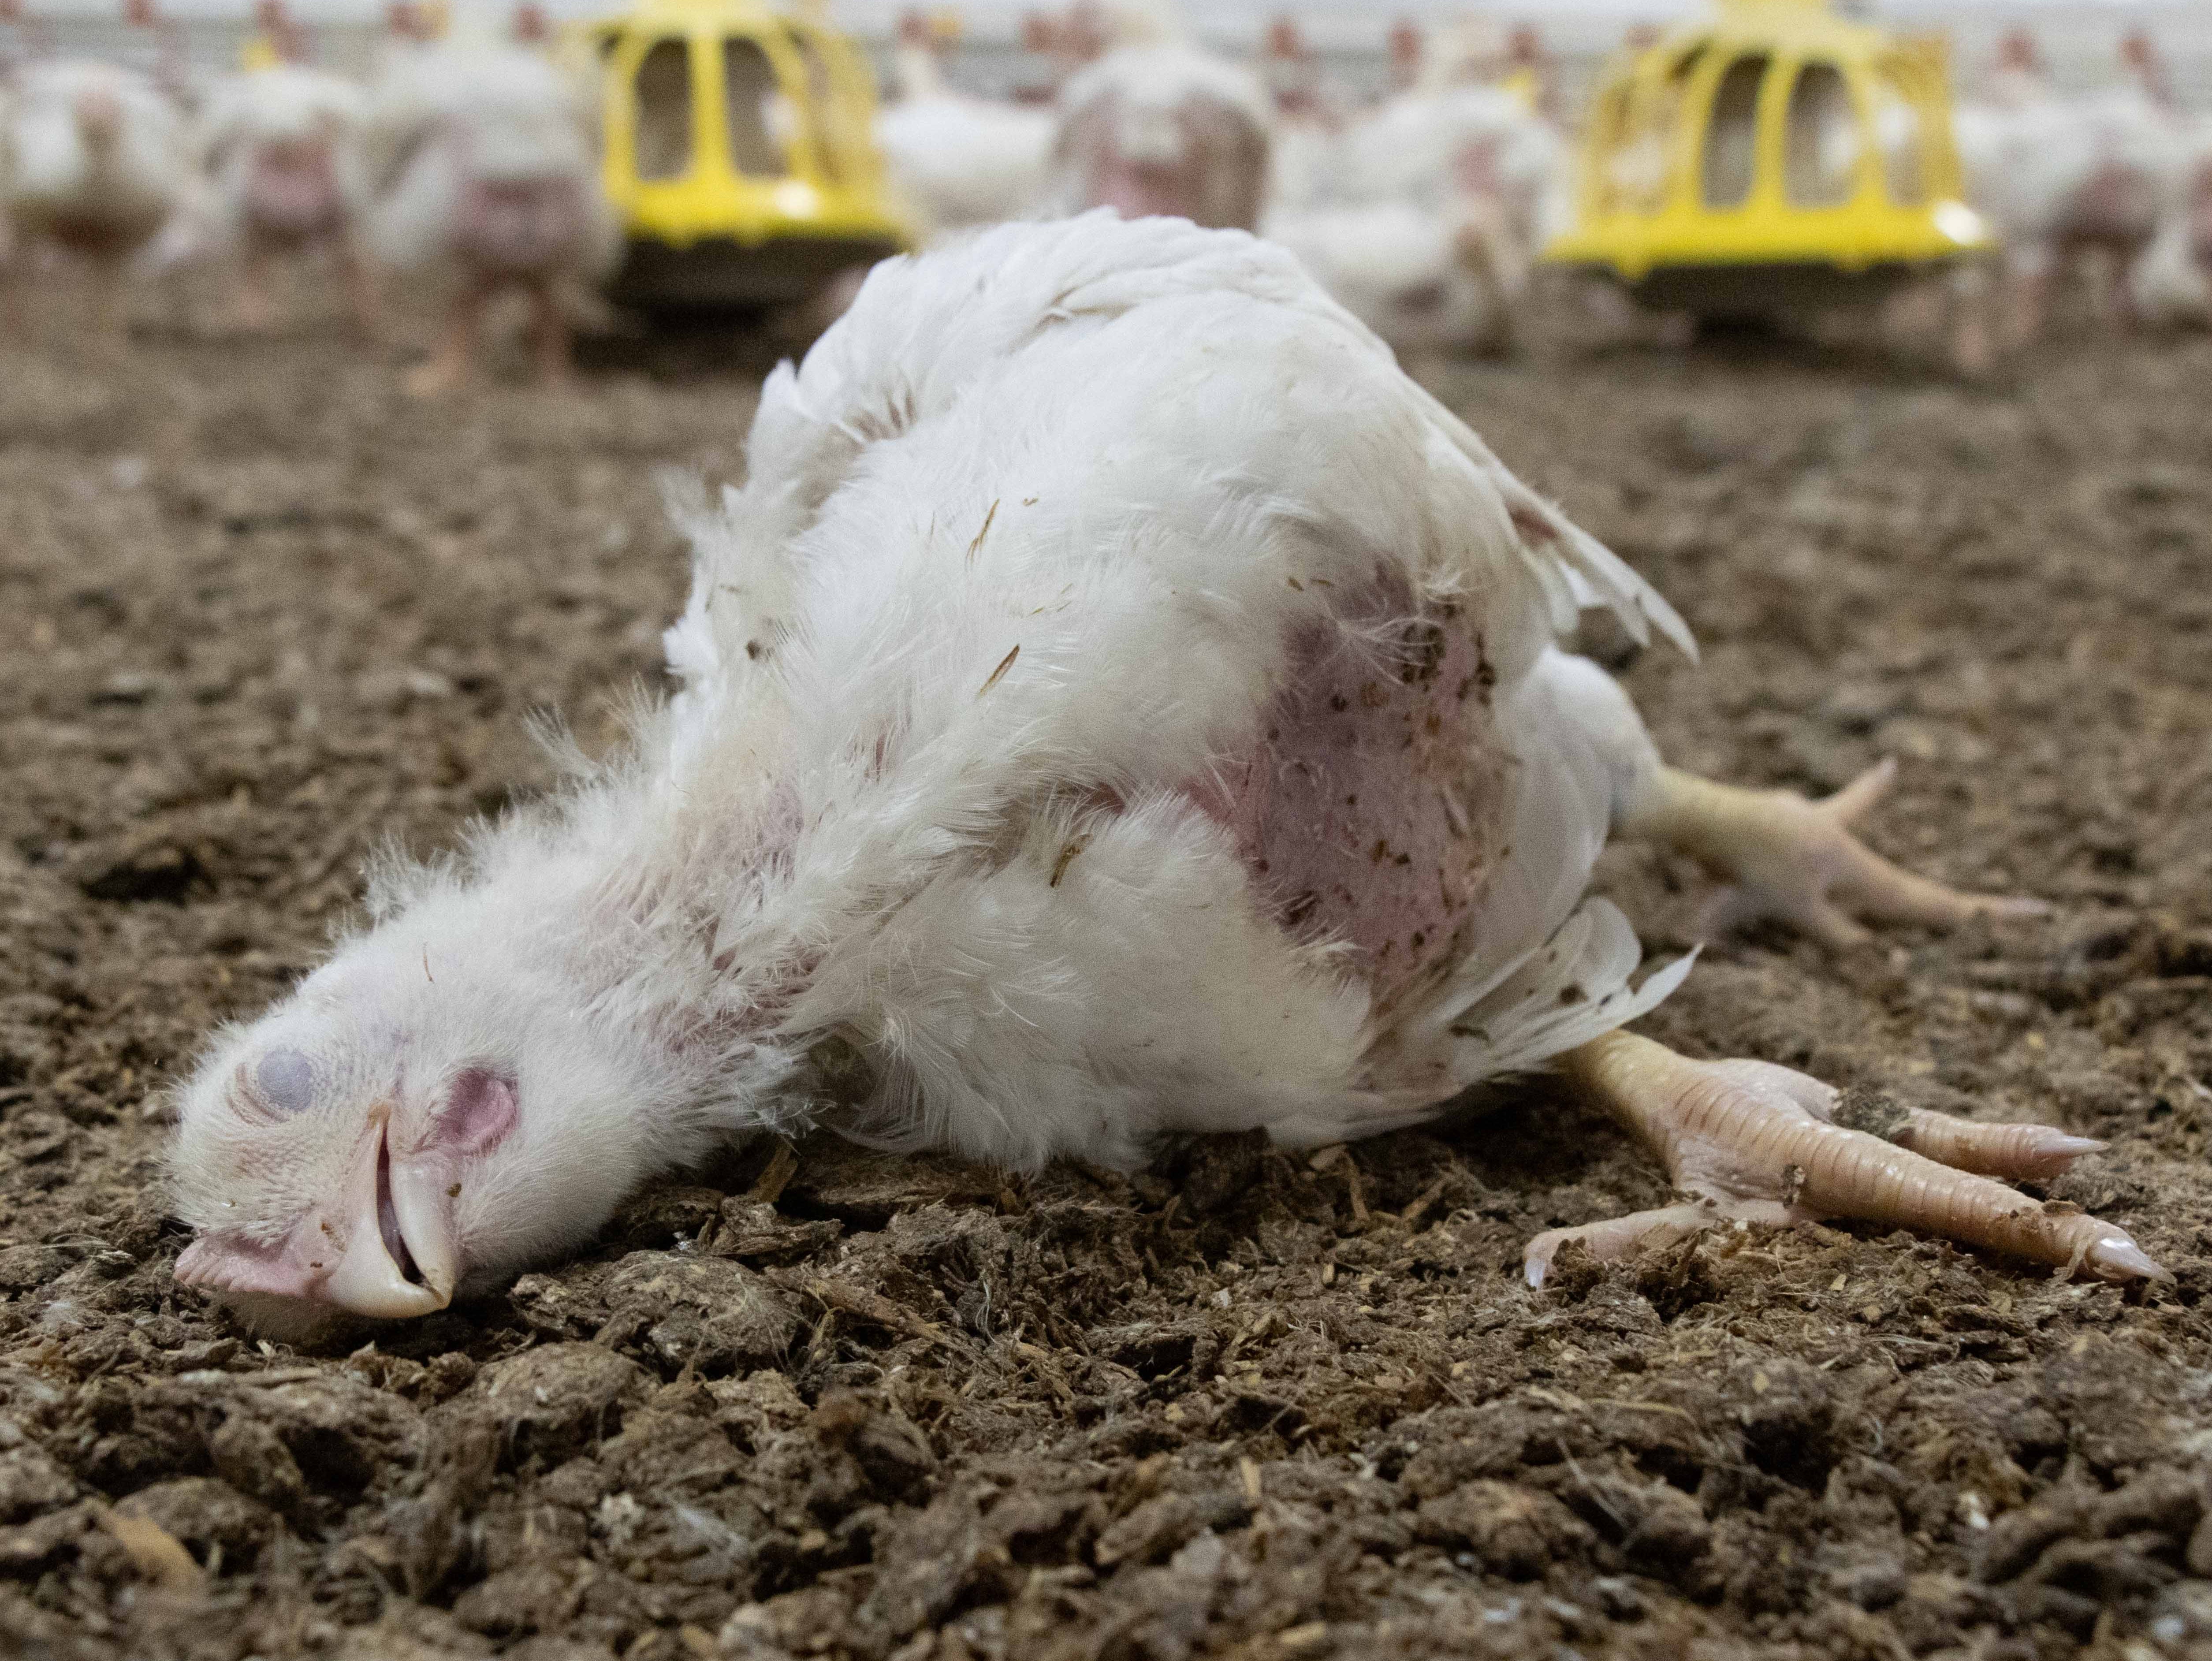 Some chickens lay dying on the ammonia-soaked floors